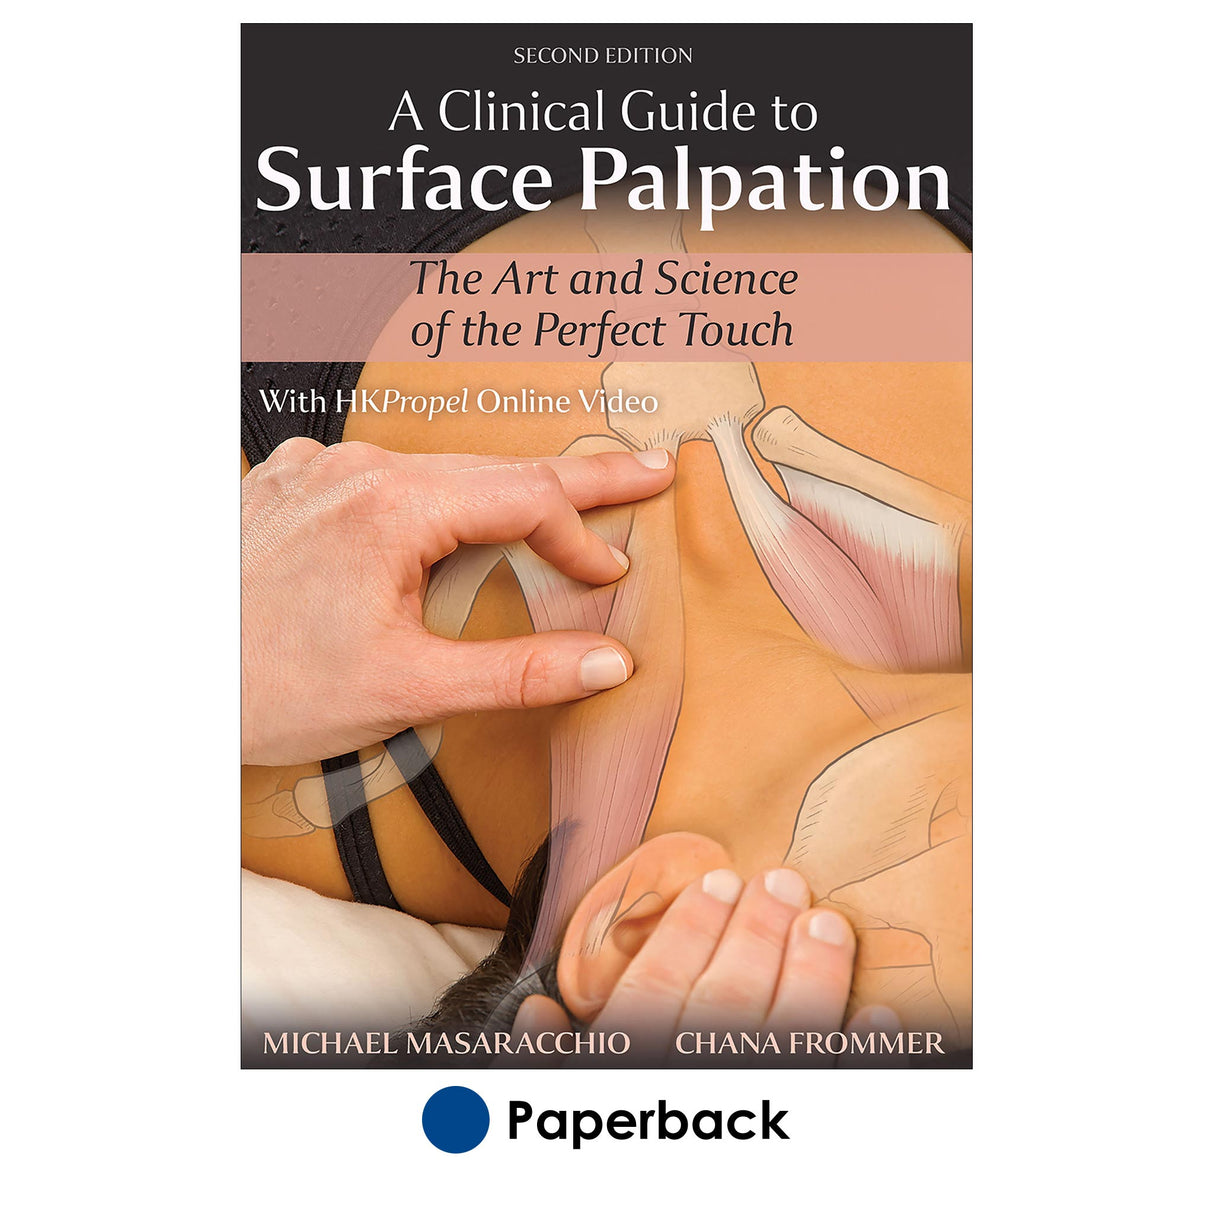 Clinical Guide to Surface Palpation 2nd Edition With HKPropel Online Video, A